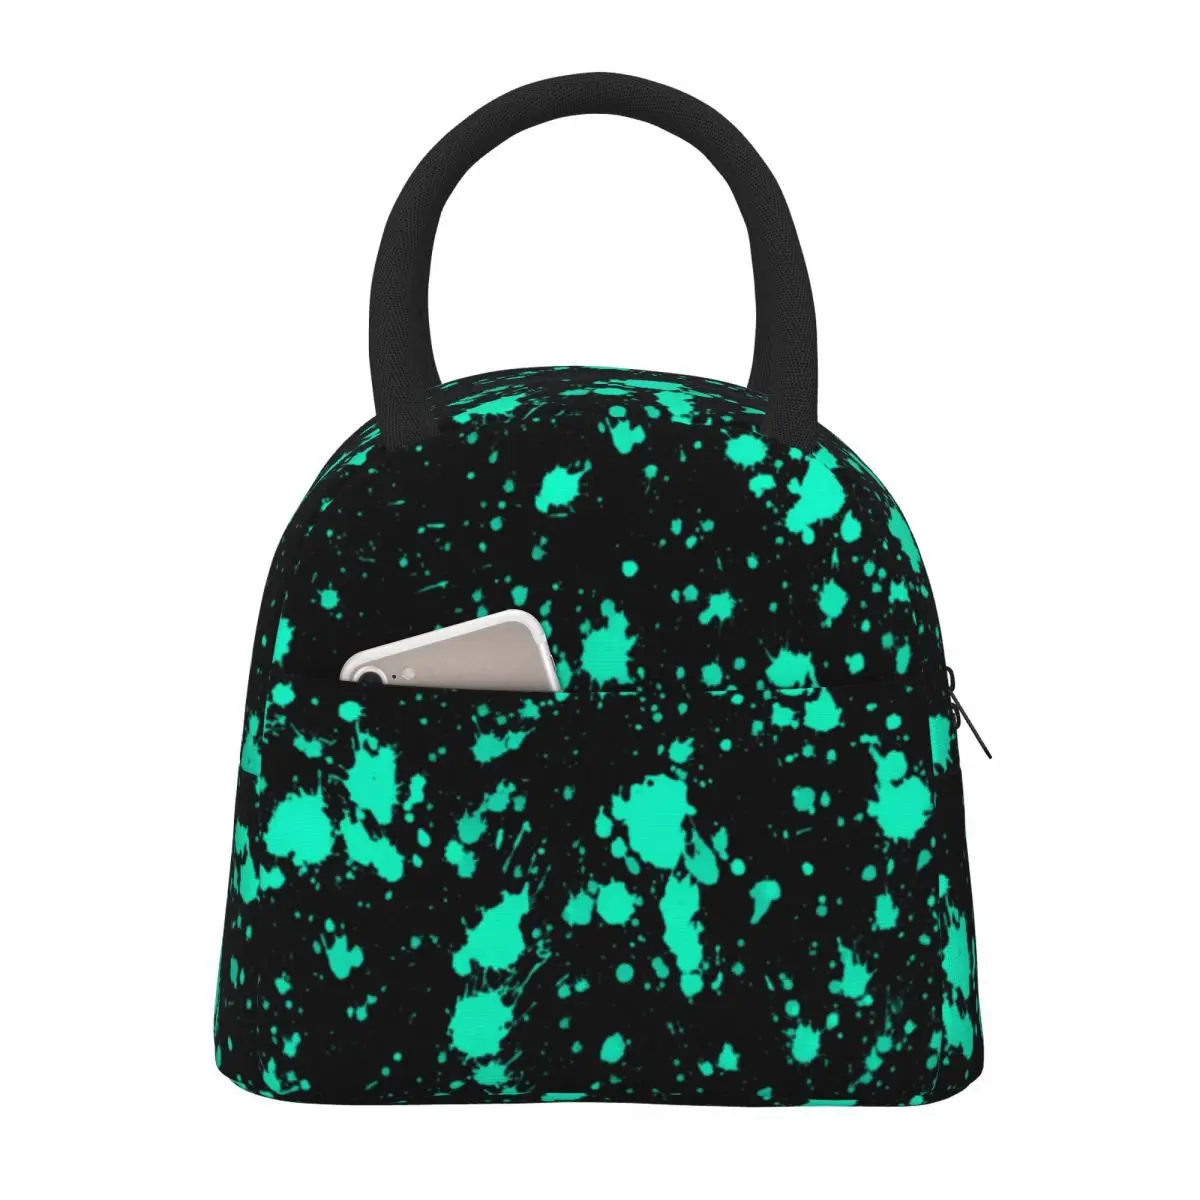 

Artistic Splash Lunch Bag Black Mint Paint Office Lunch Box For Women Kawaii Graphic Tote Food Bags Oxford Convenient Cooler Bag